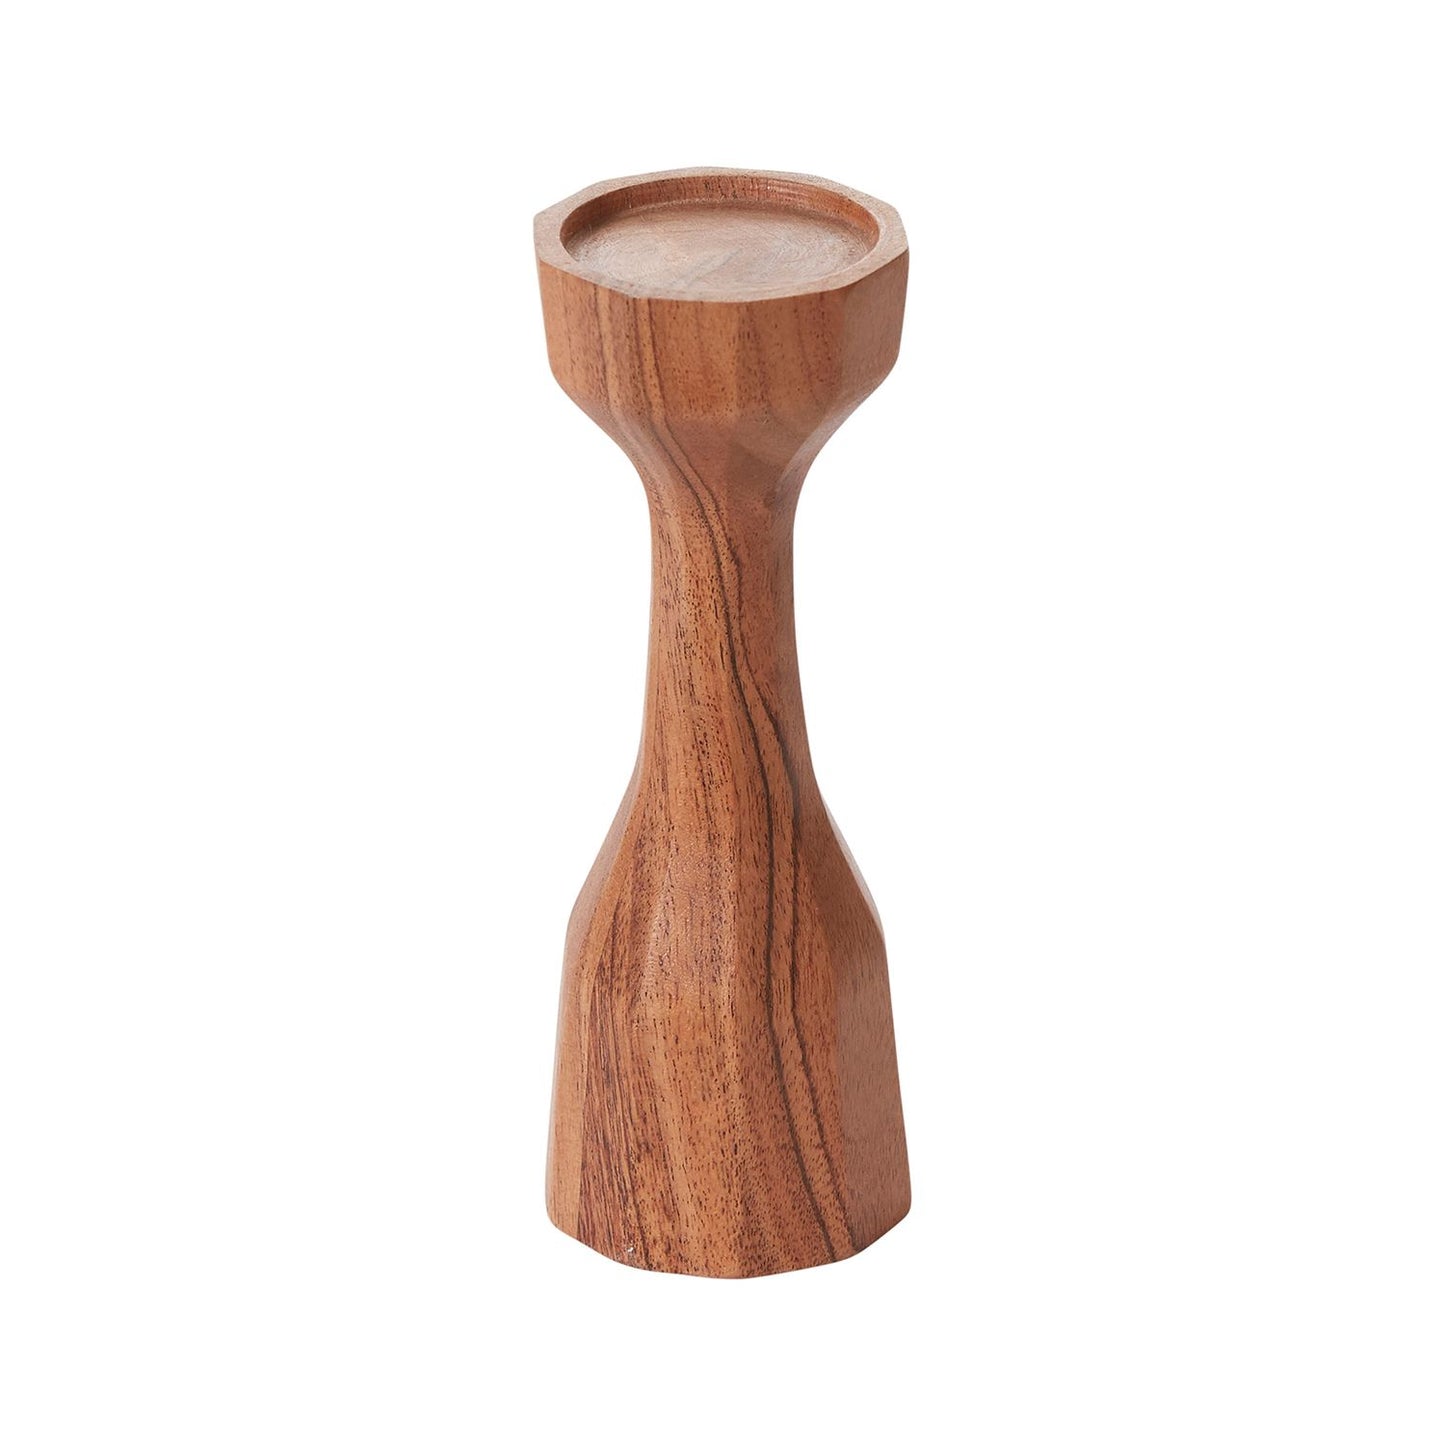 Hand-Carved Acacia Wood Candleholder